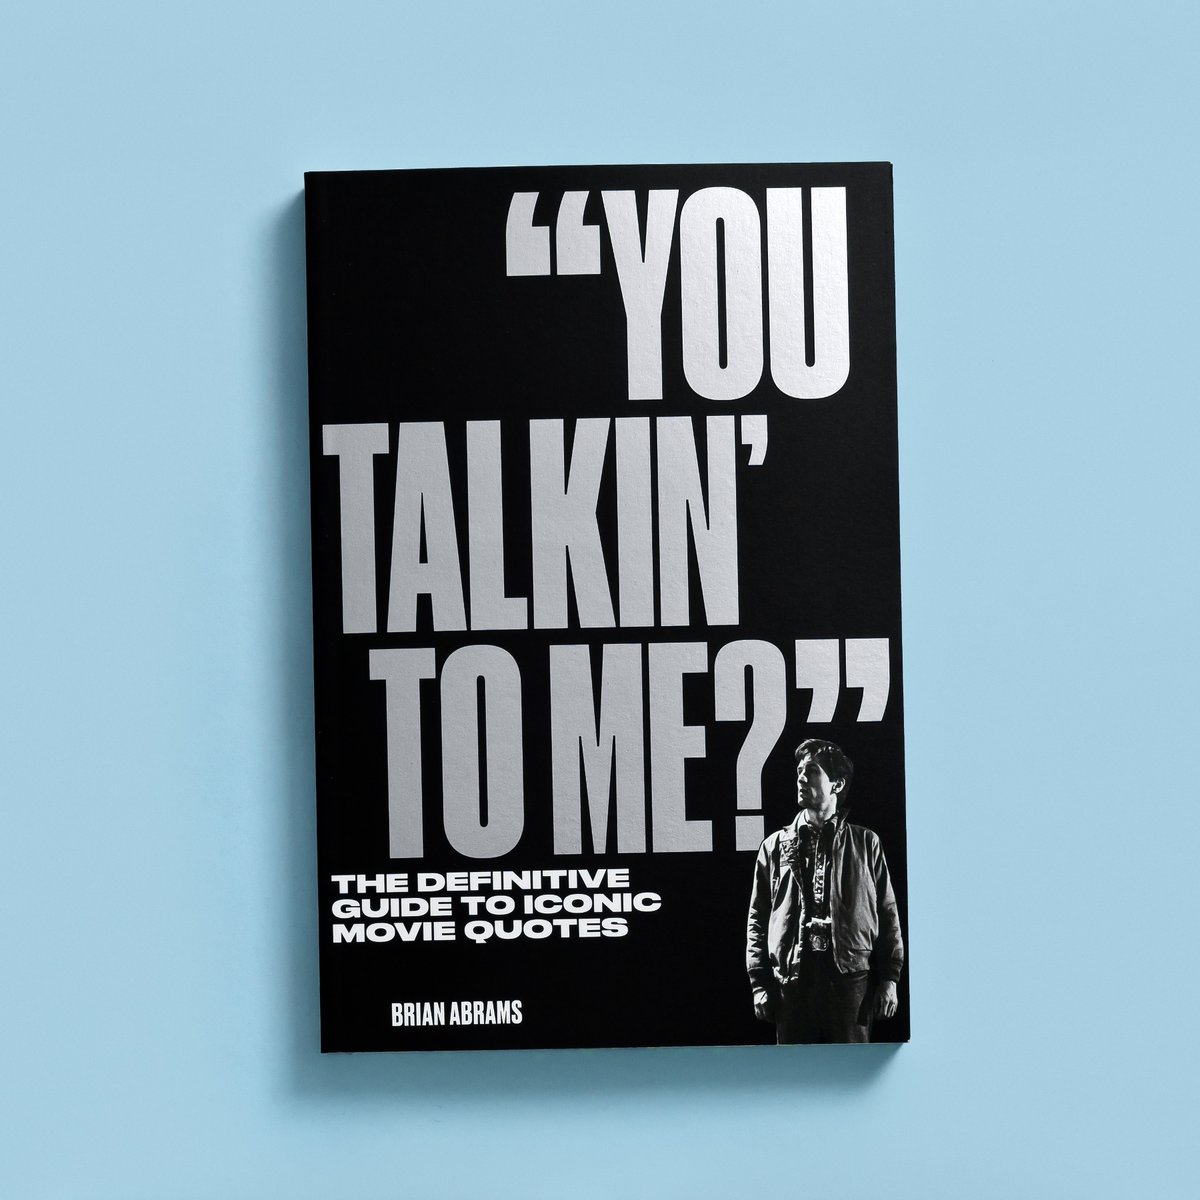 Happy #Oscars day to all our fellow movie-lovers! We are so thrilled that “You Talkin’ to Me?” is included in the “Everyone Wins” Gift Bags given independently to top Oscar ® nominees. Get your own copy so you can do a buddy read with some of Hollywood’s biggest stars 😇